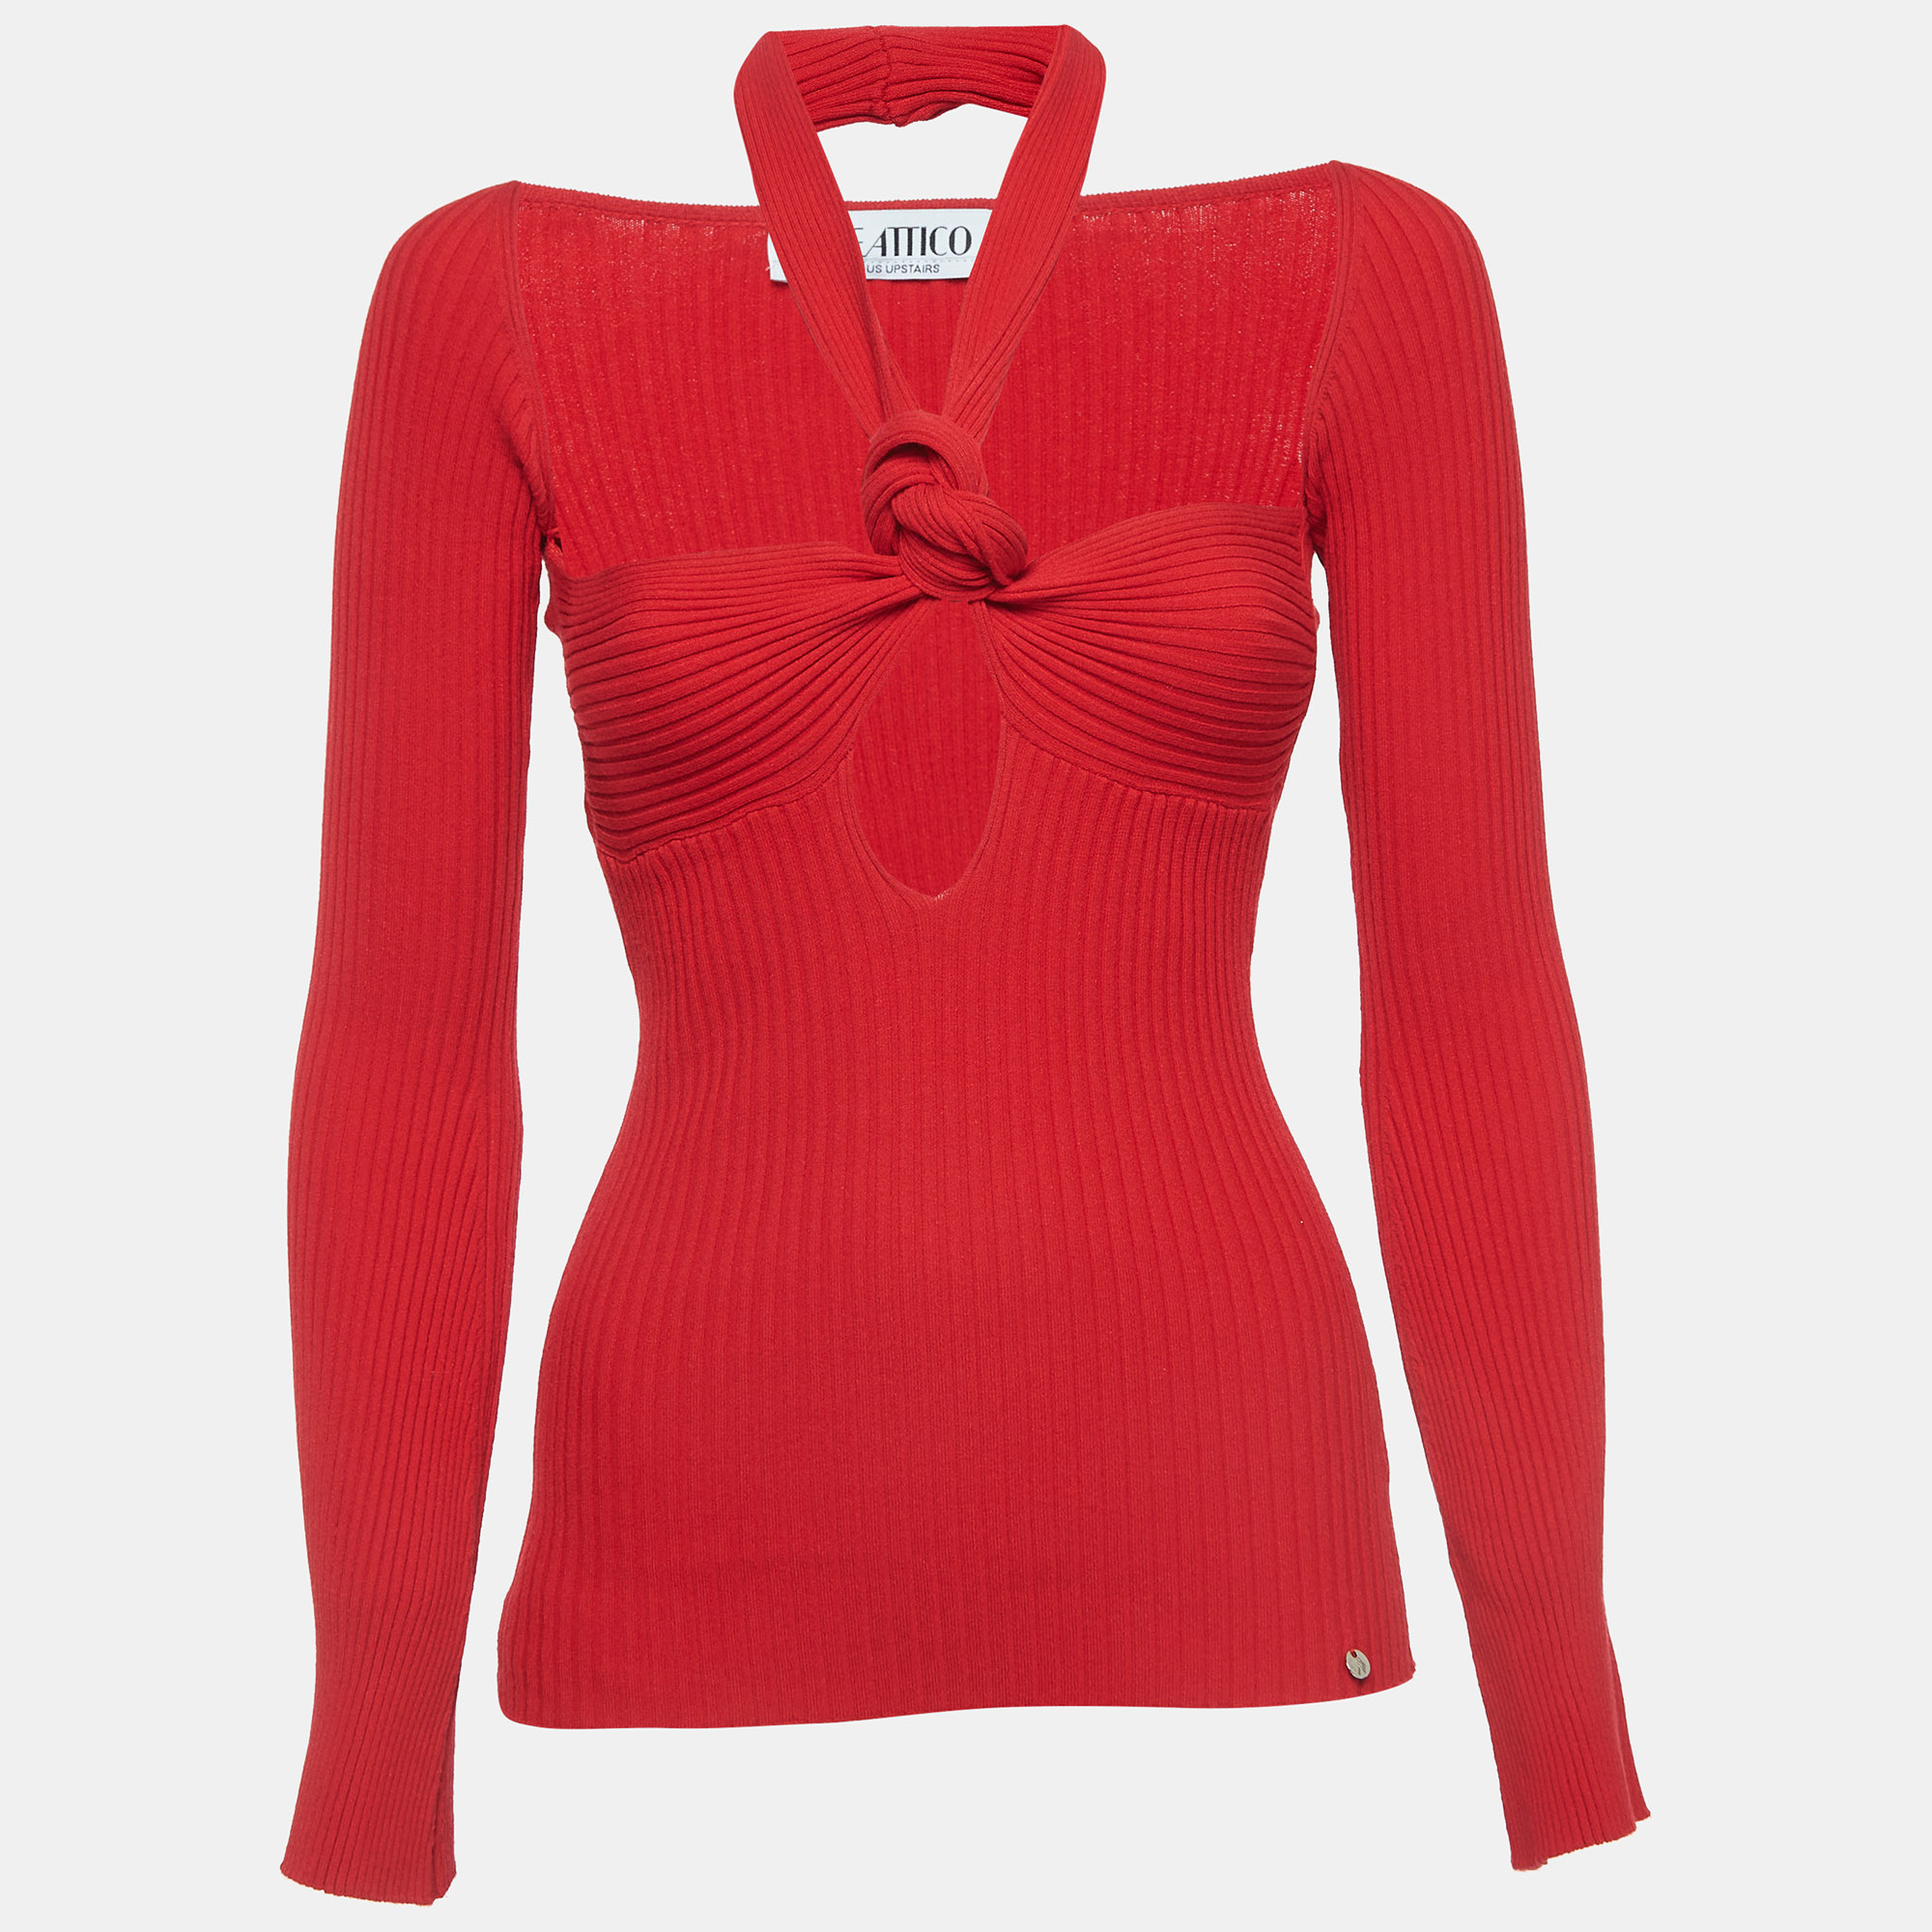 The attico red ribbed kit cutout knotted top s